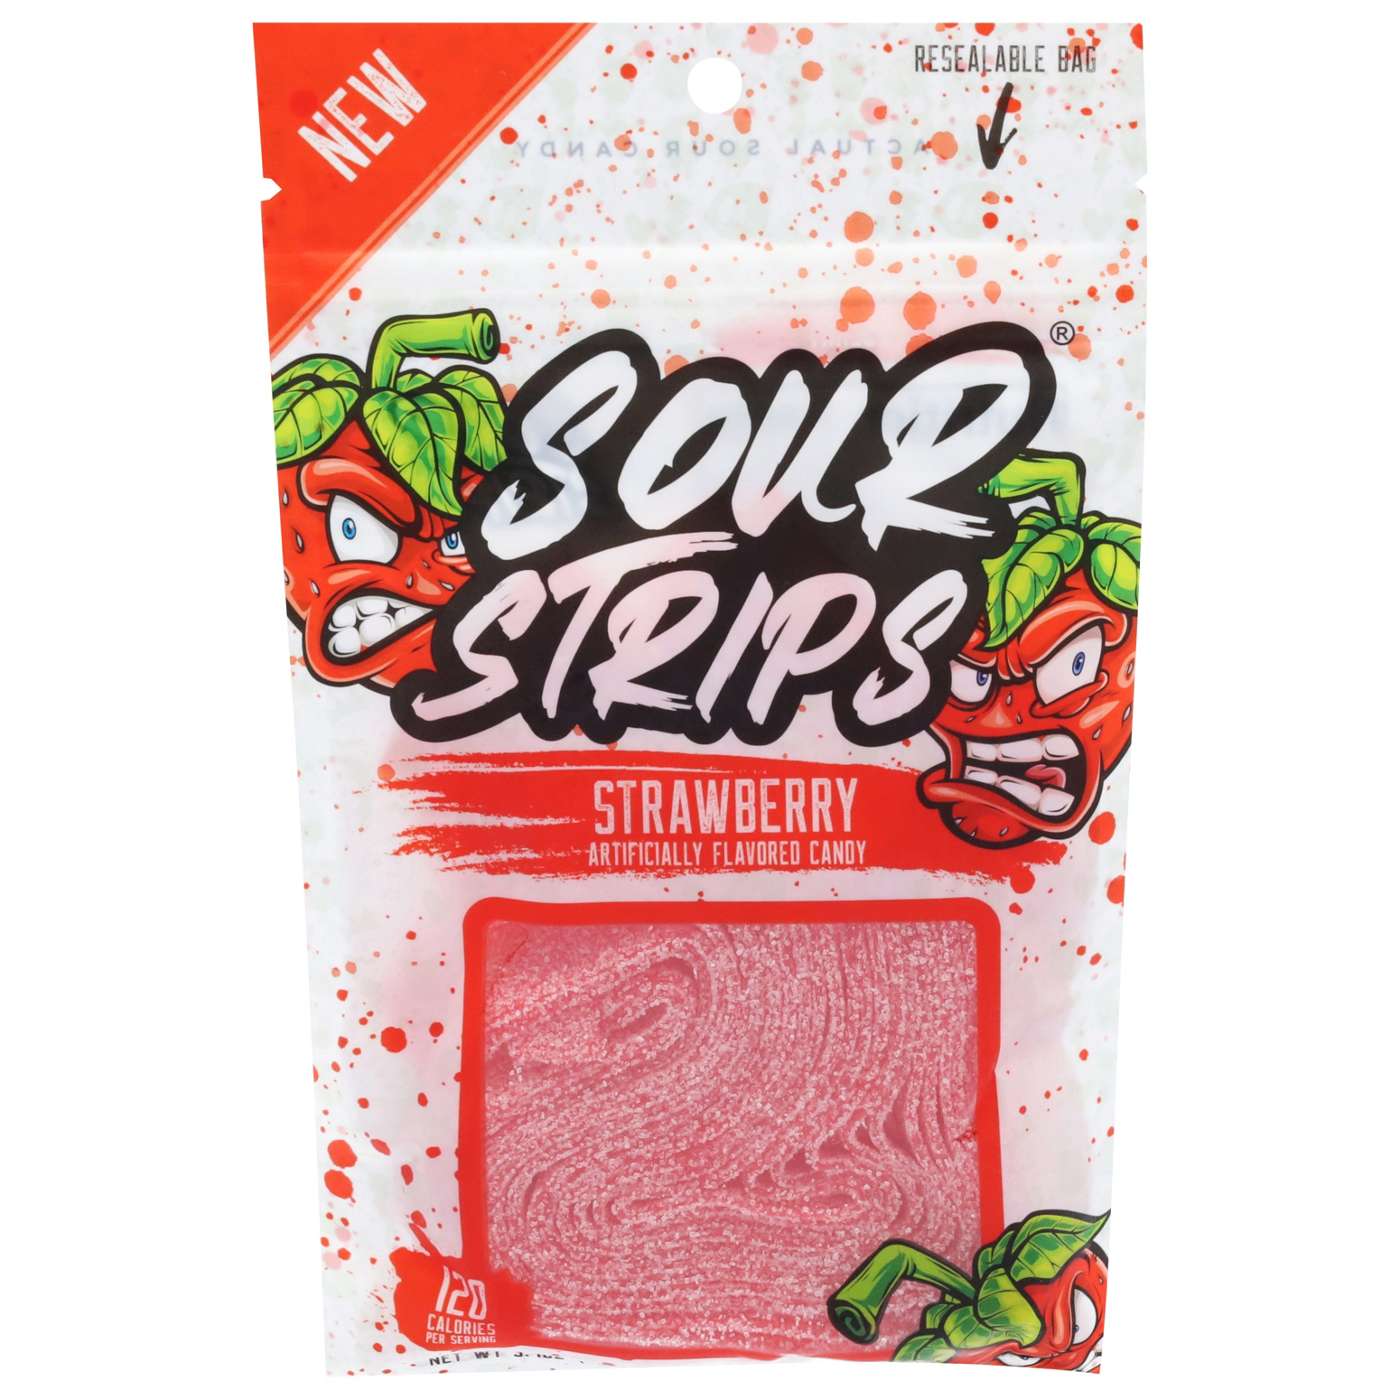 Sour Strips Strawberry Candy; image 1 of 2